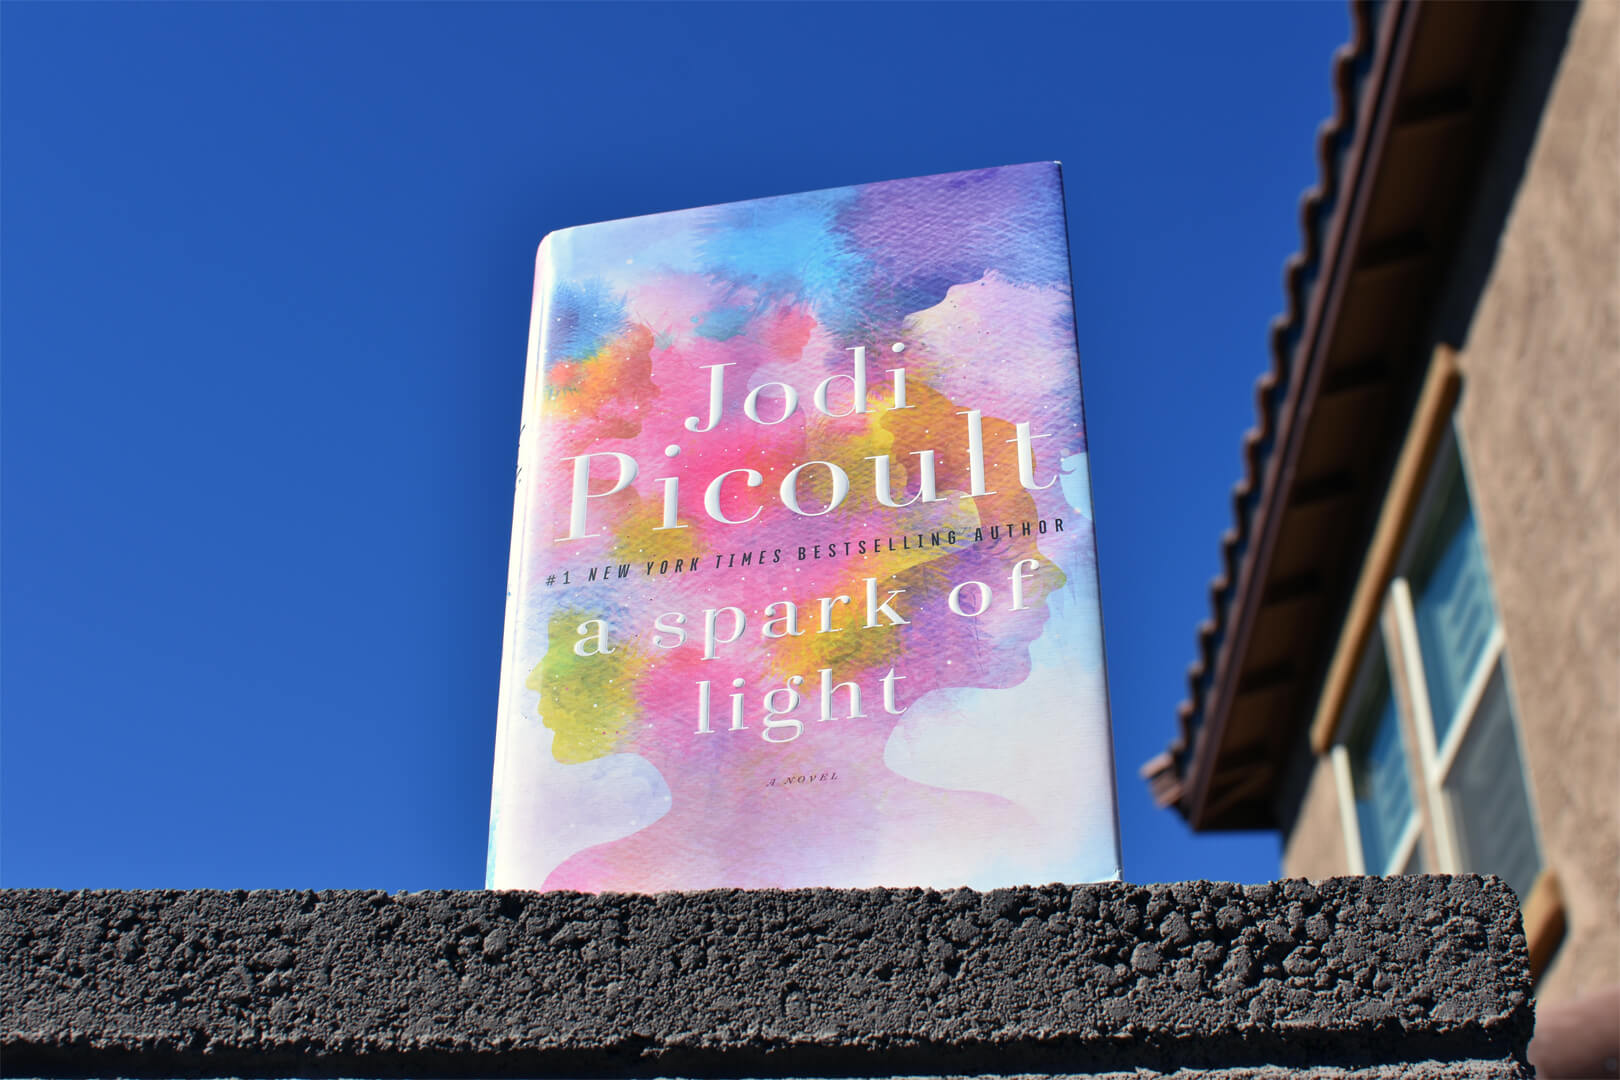 Book Club Questions for A Spark Of Light by Jodi Picoult